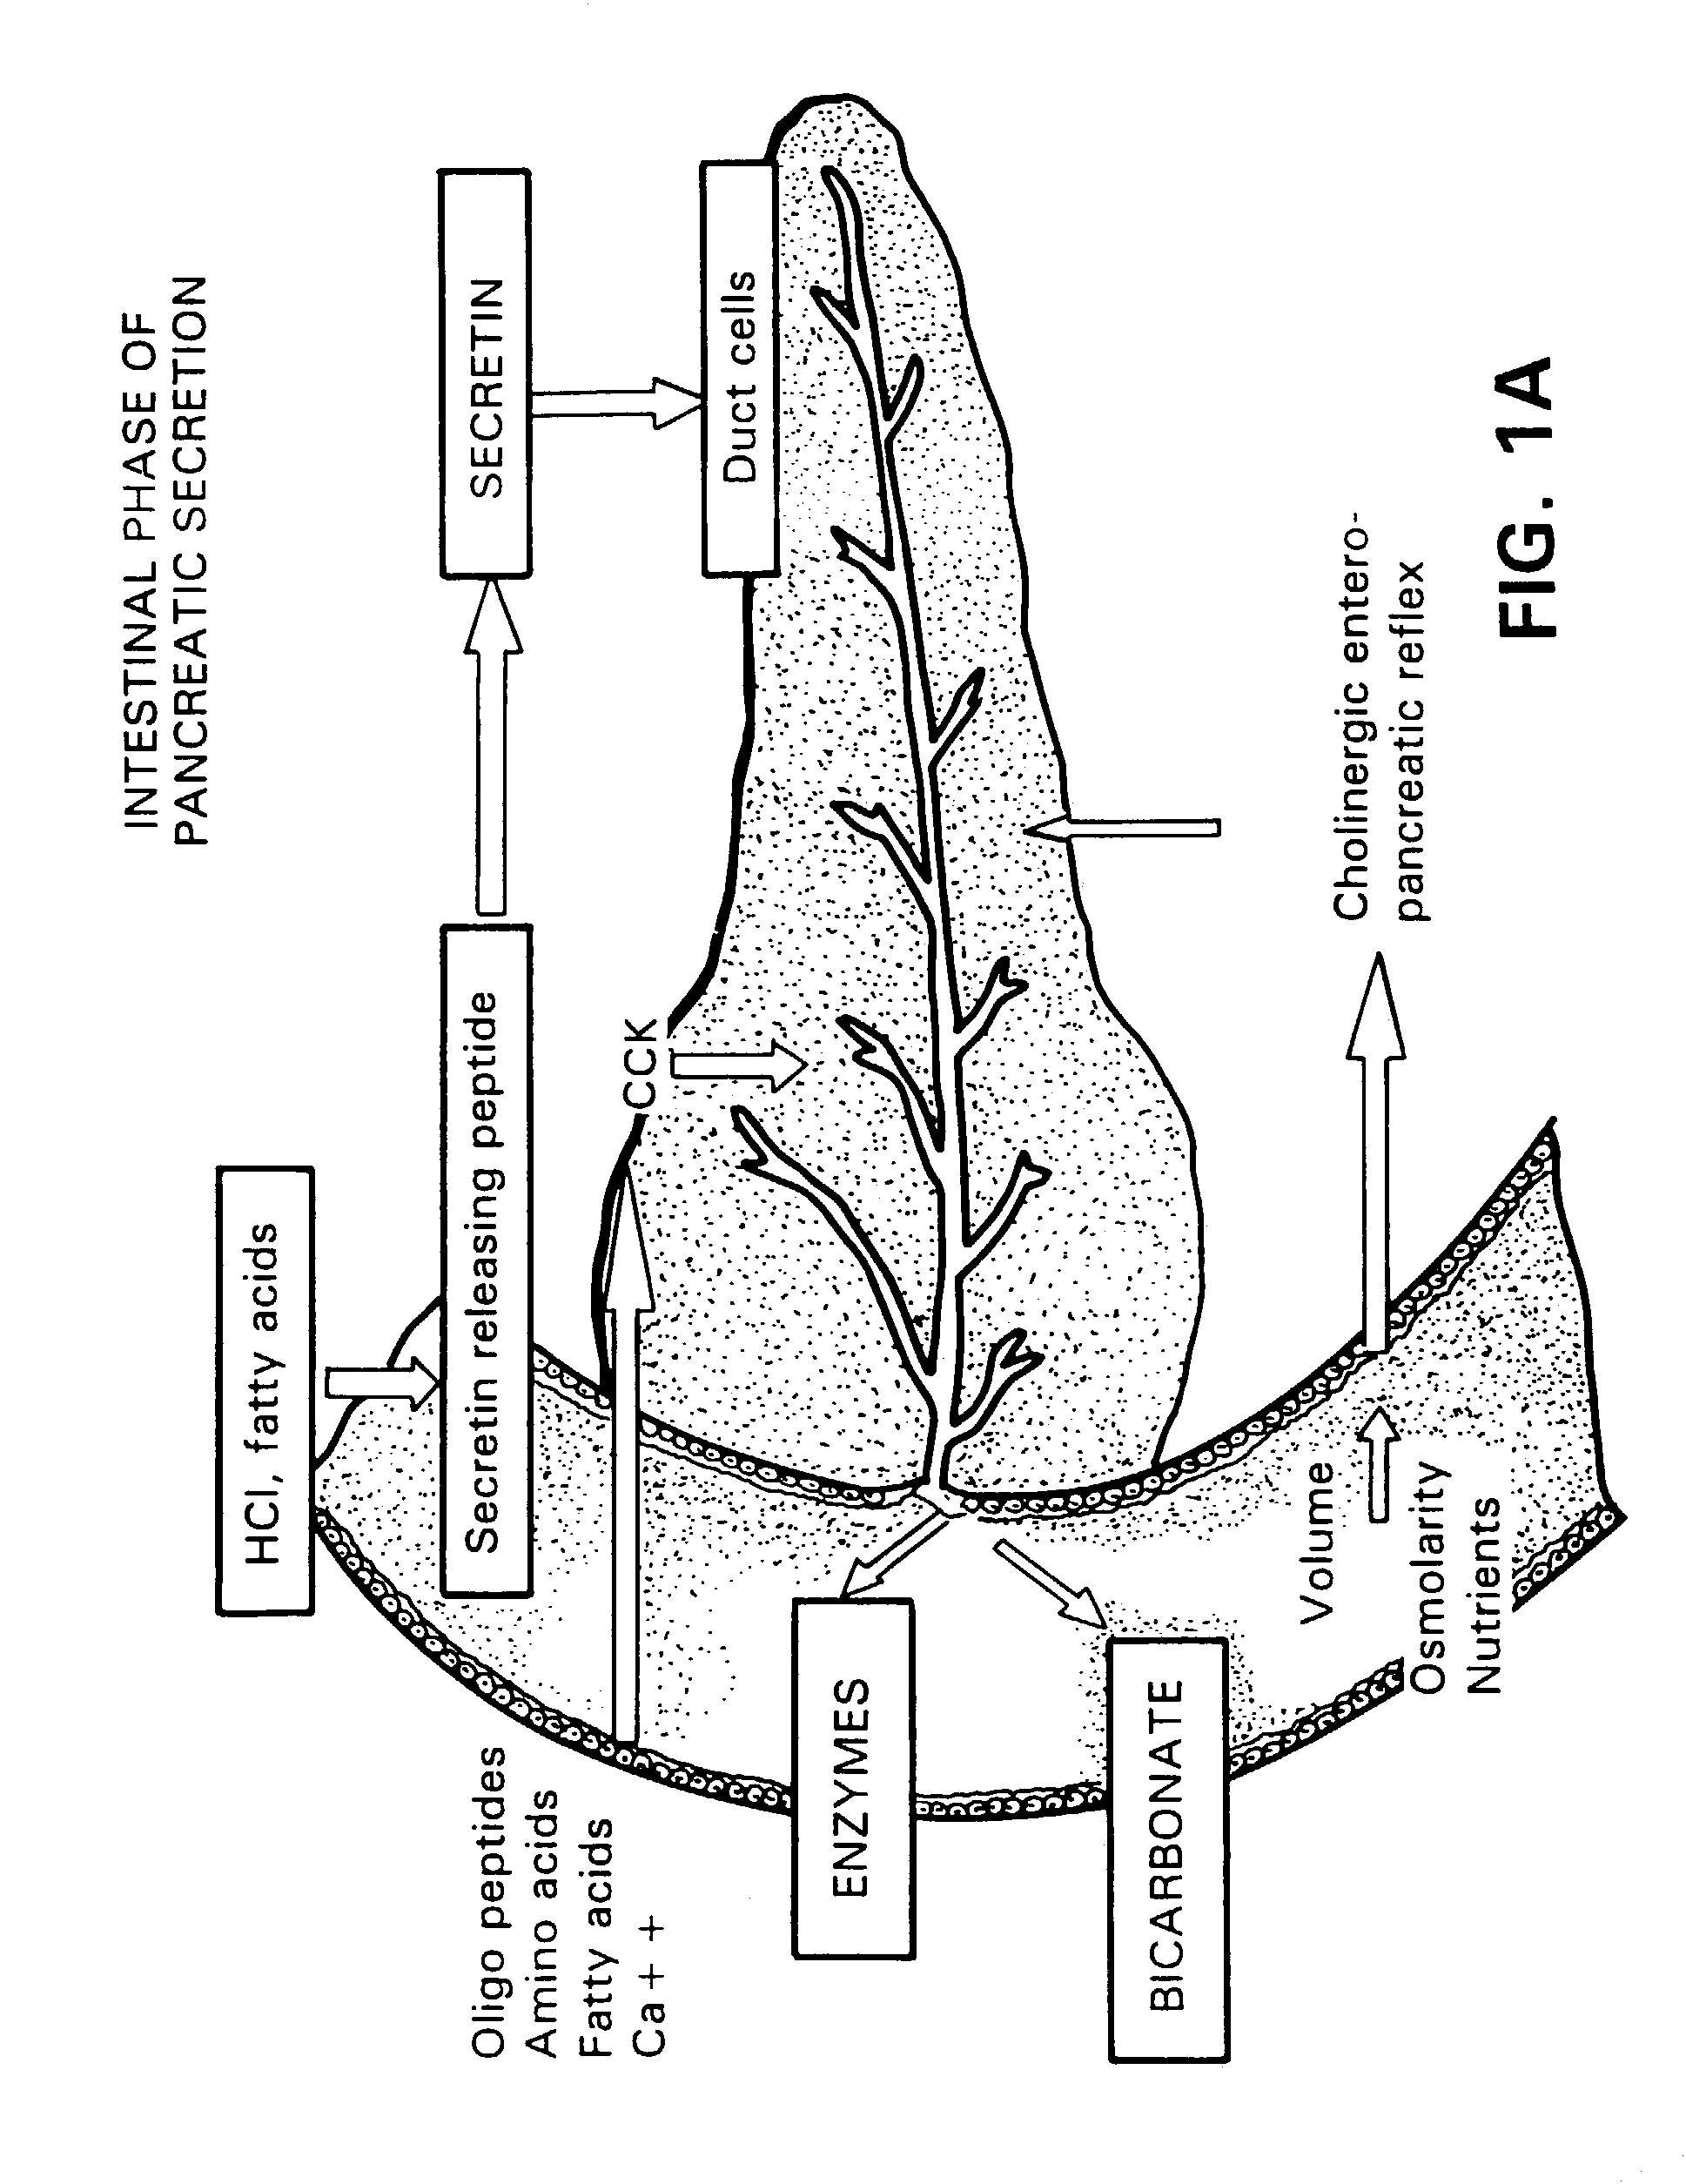 Method for assisting in differential diagnosis and treatment of autistic syndromes